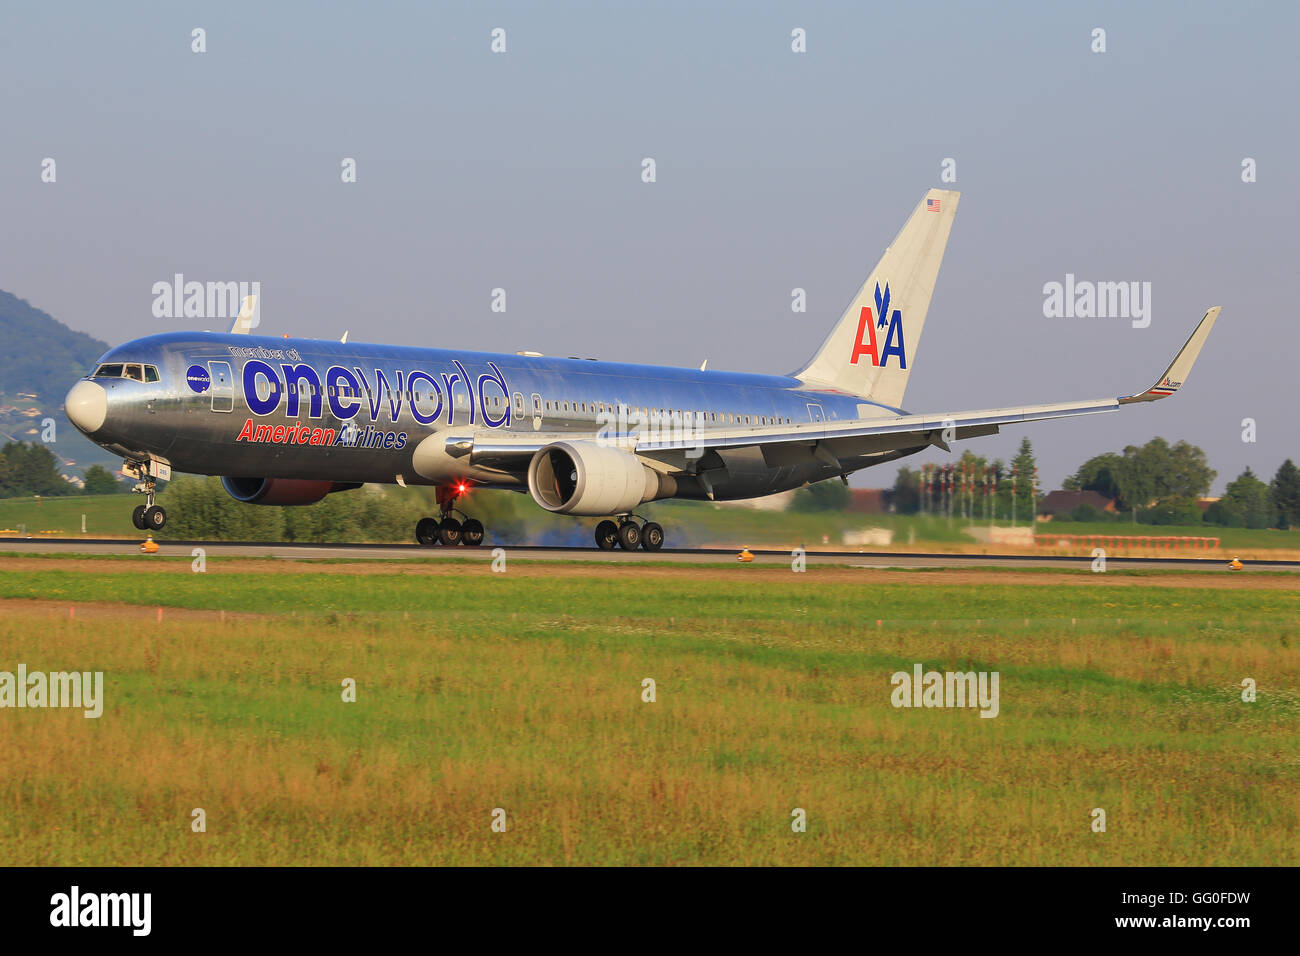 An American Airlines Boeing 767 taking off Stock Photo